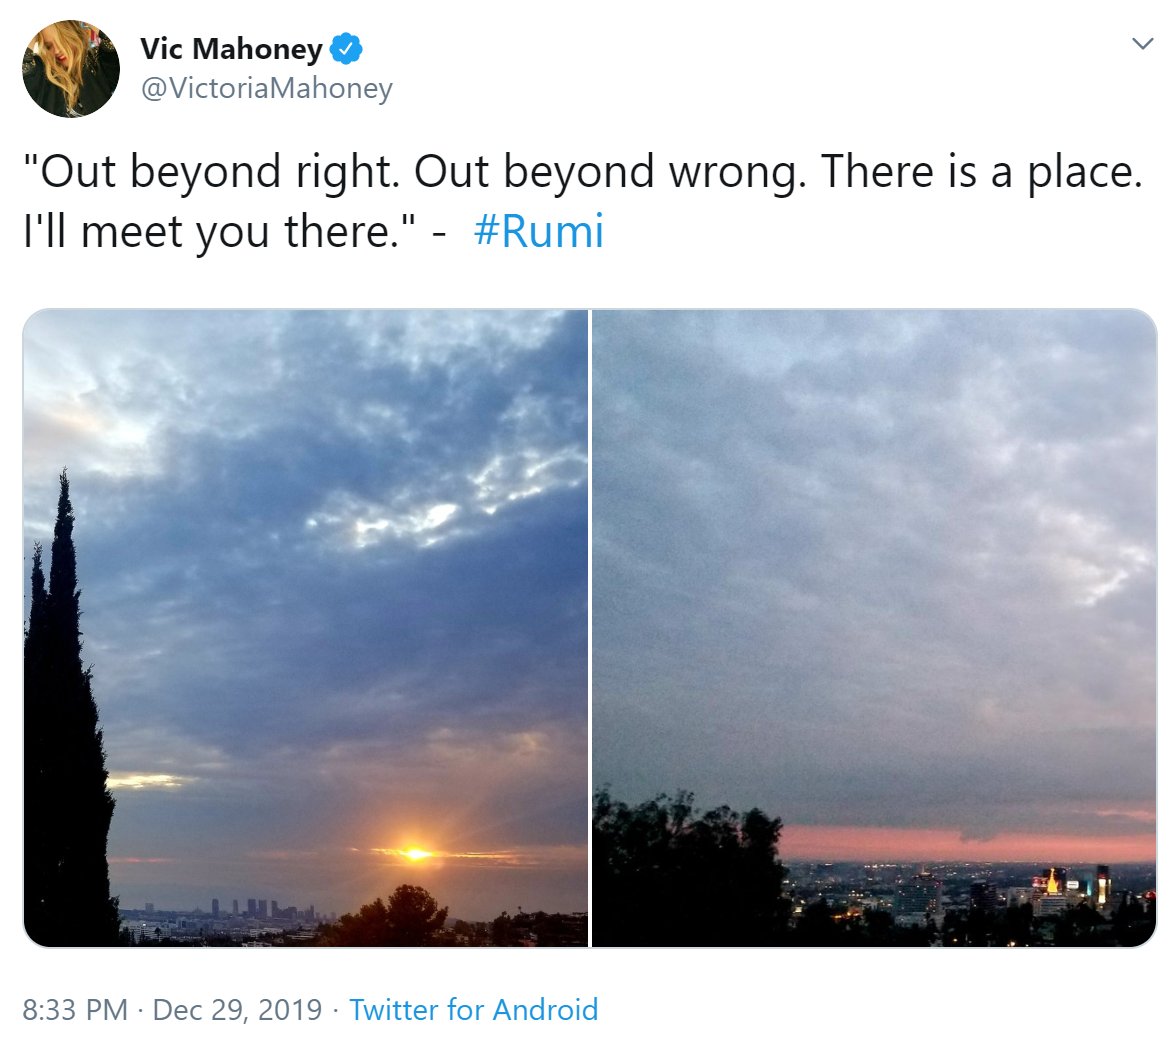 The end of the Rumi poem is basically the WBW:People are going back and forth across the doorsillwhere the two worlds touch.The door is round and open.Also now realized Vic Mahoney's tweet gave us more sun images. Wtf.Thanks  @OutletFangirl for reminding me of the full poem